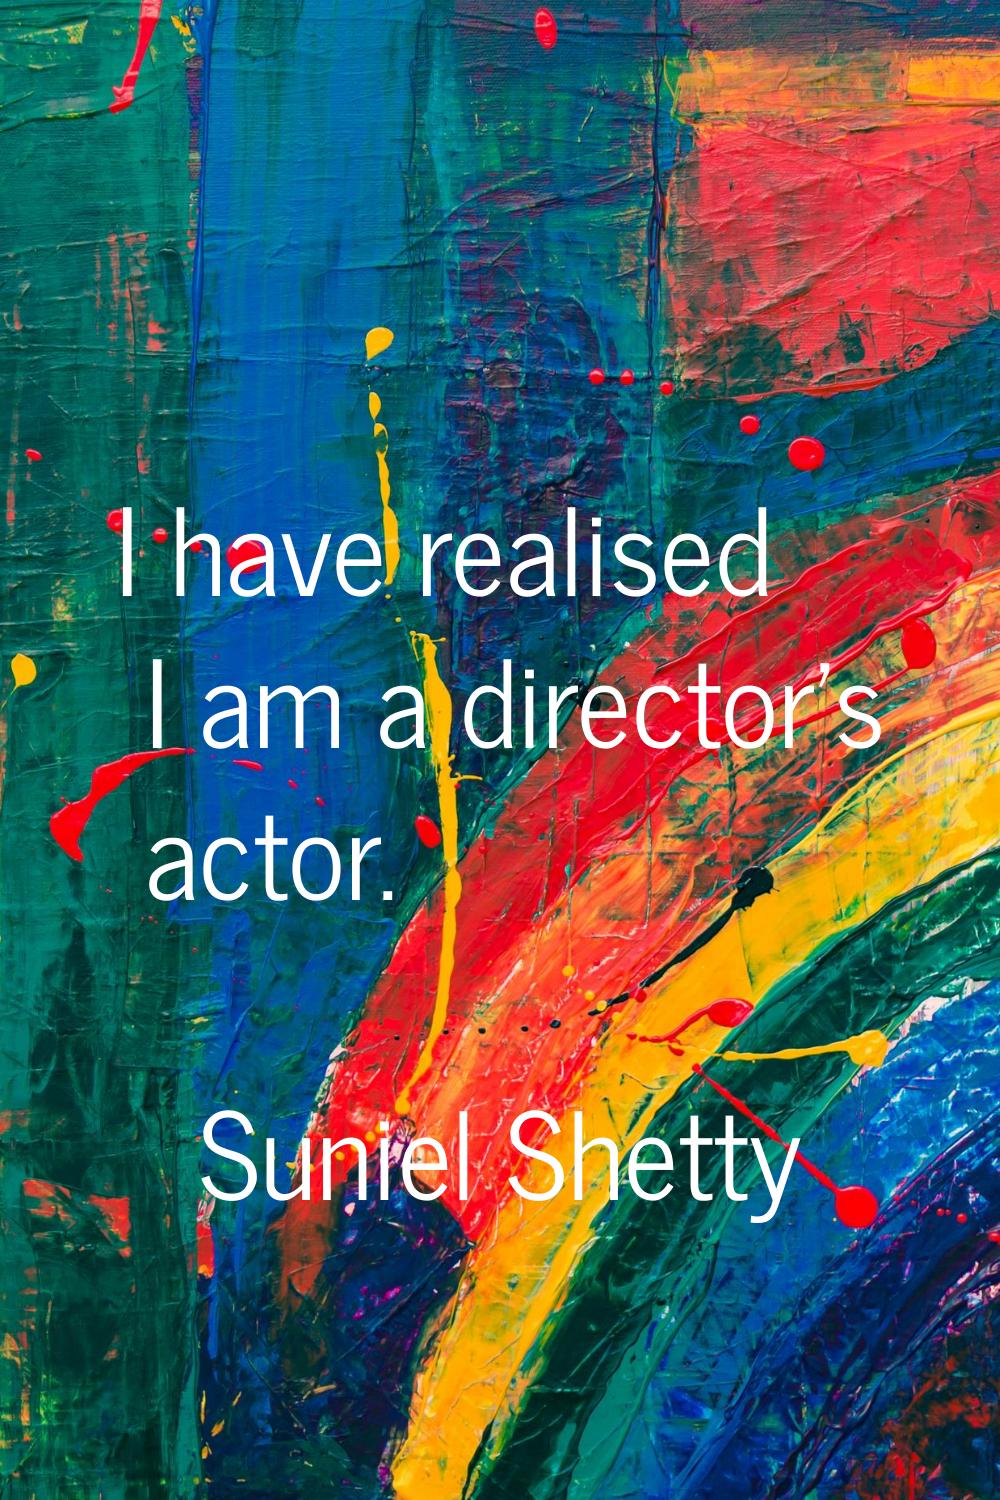 I have realised I am a director's actor.